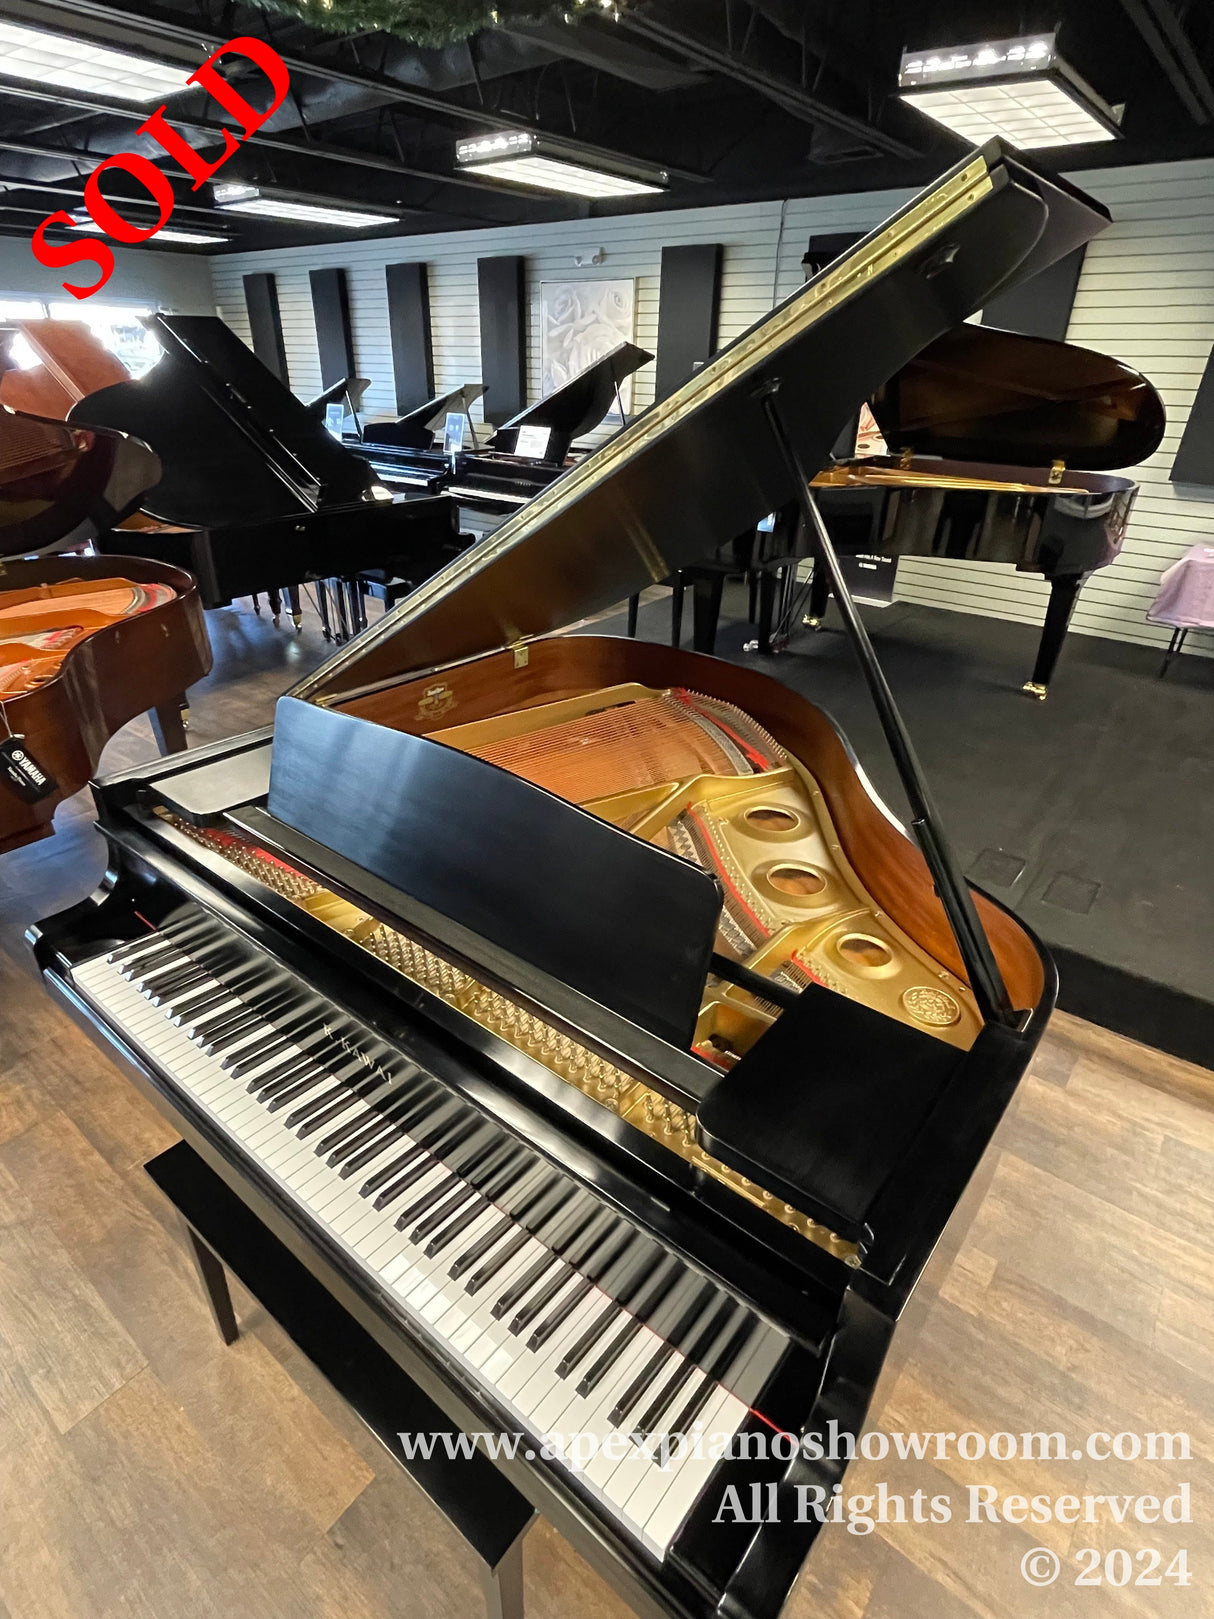 A grand piano with an open lid displaying its internal strings and hammers, situated in a showroom with multiple pianos in the background.